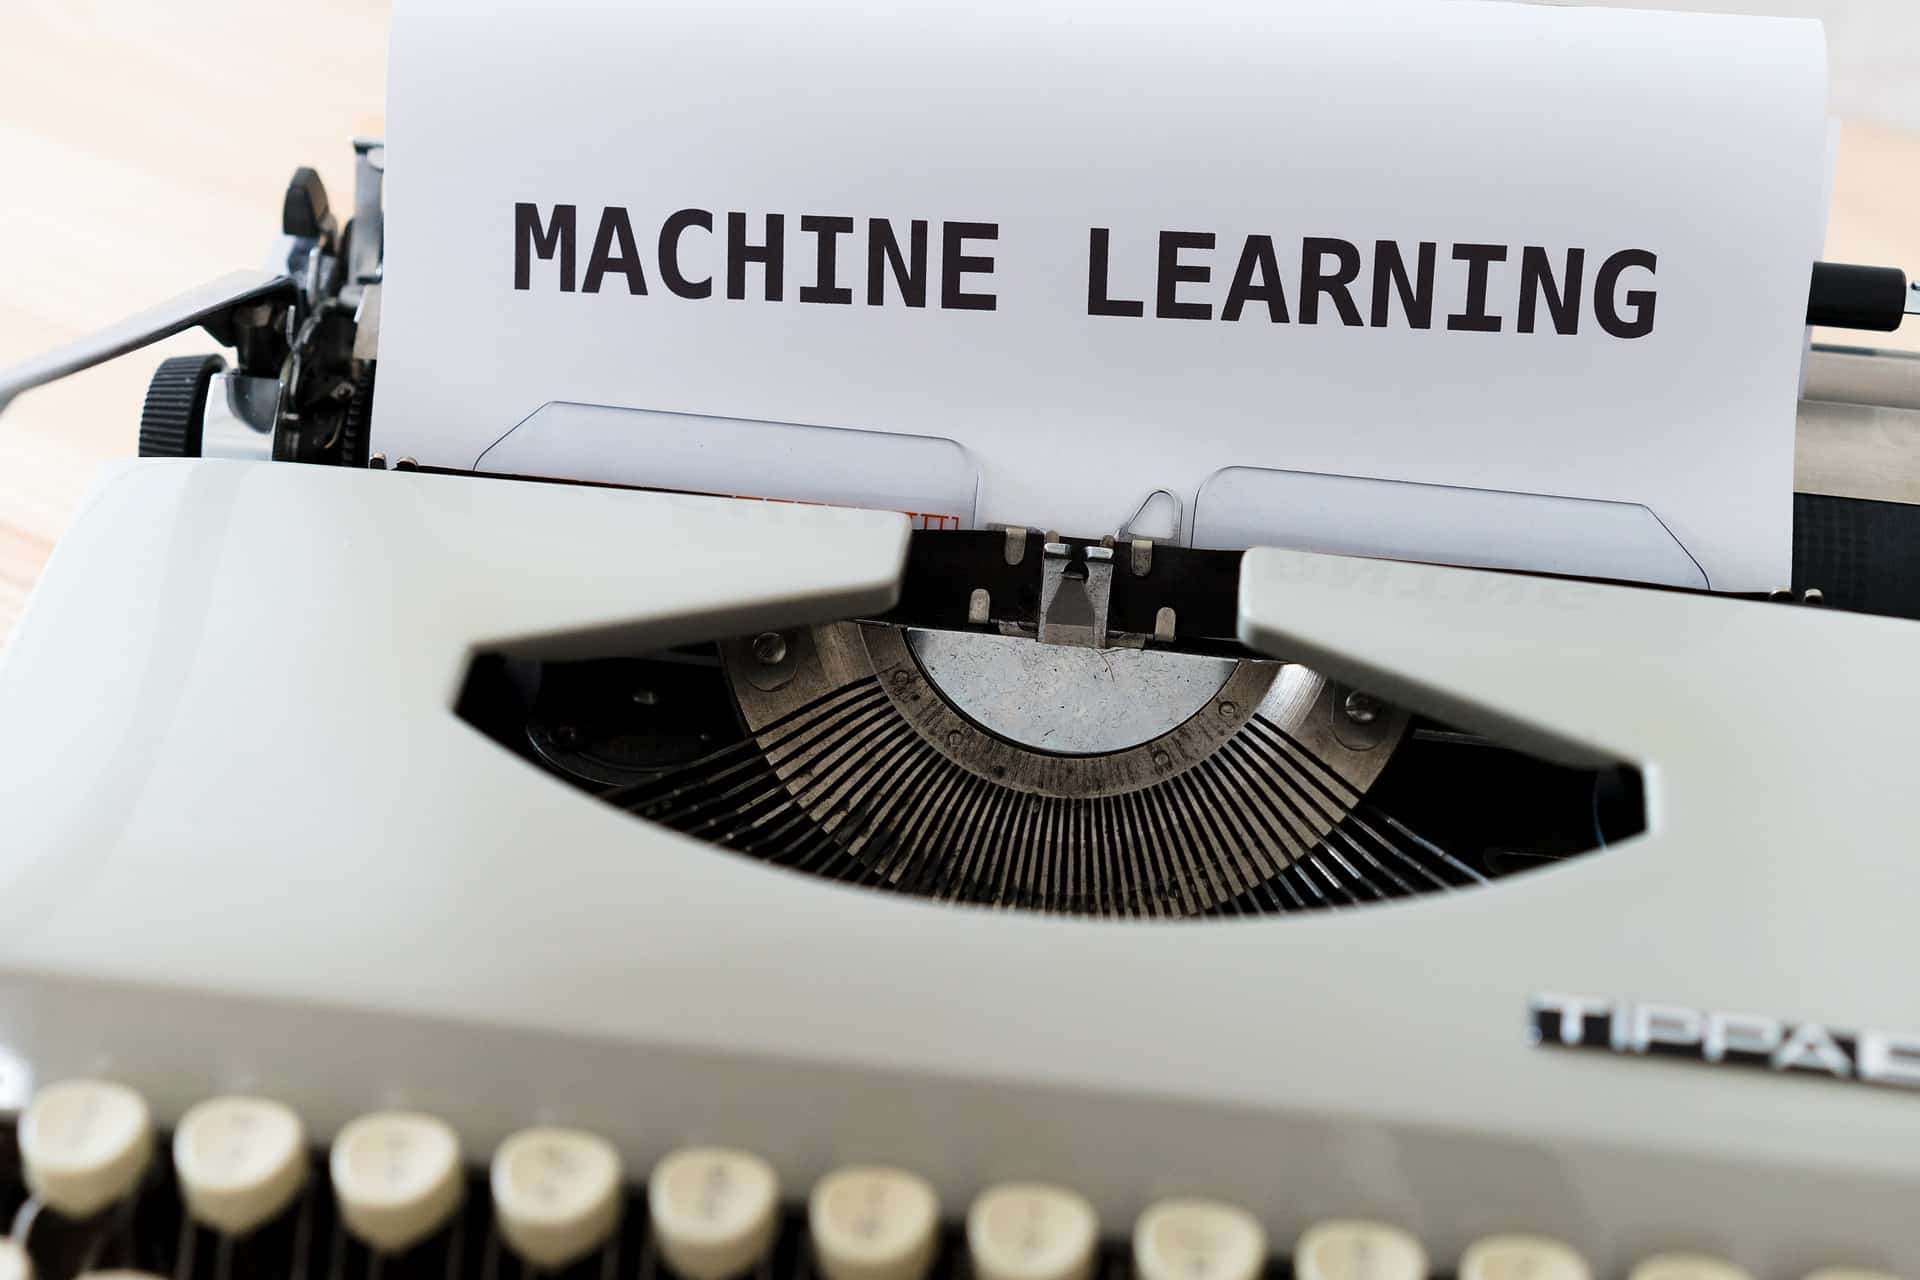 What No One Will Tell You About Learning Machine Learning (Your Full Guide to Start) machine learning,artificial intelligence,AI